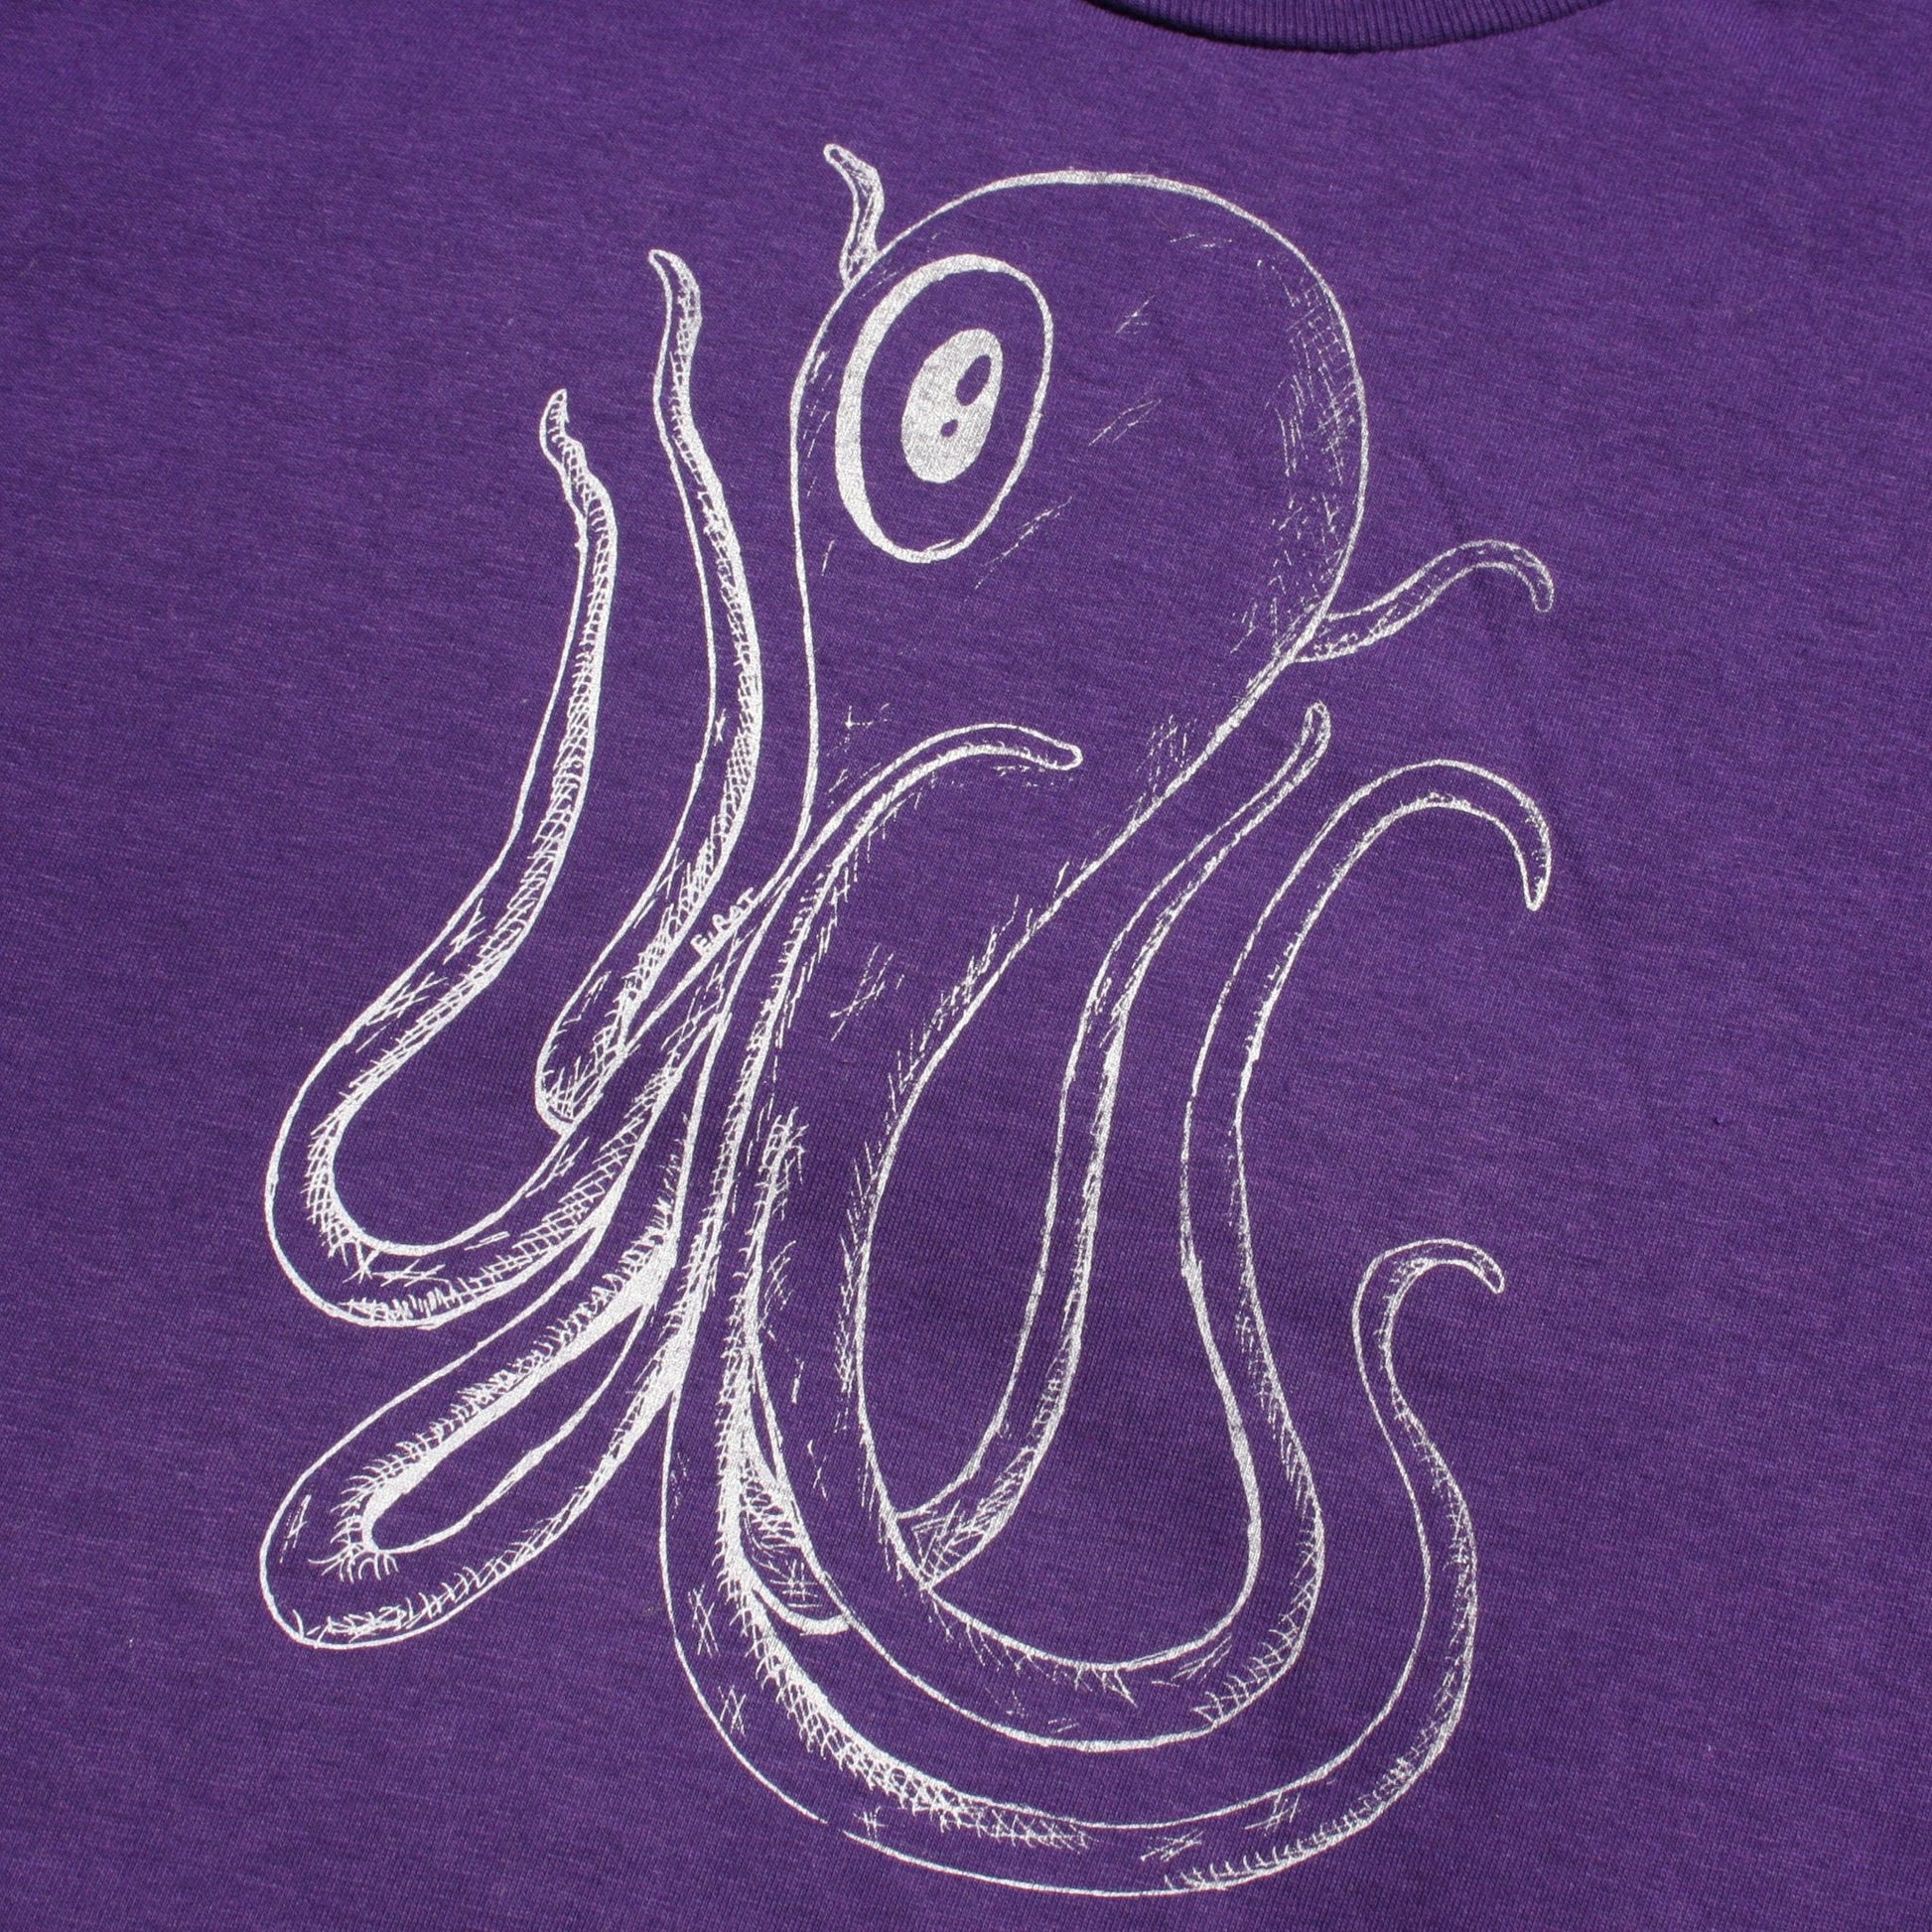 Octoclops tee - Purple T-Shirt with white print - ElRatDesigns - T Shirt